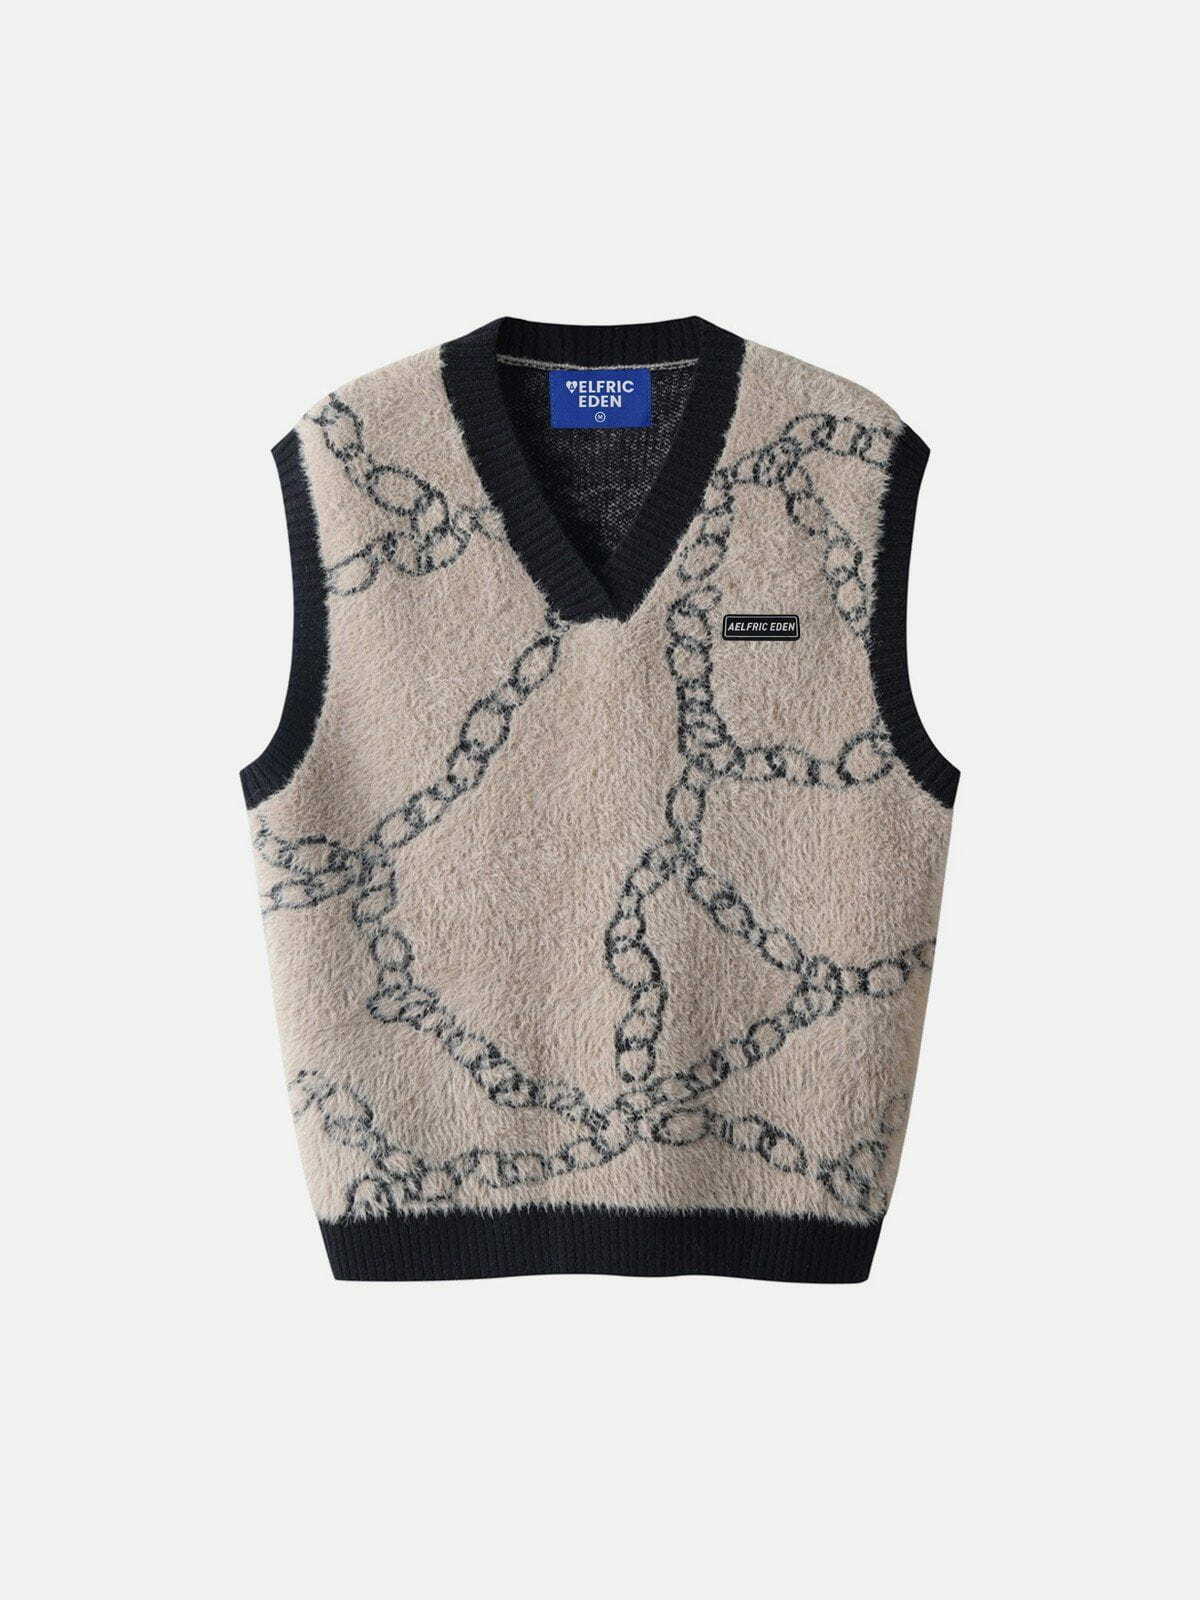 youthful irregular chain sweater vest   chic urban appeal 7331